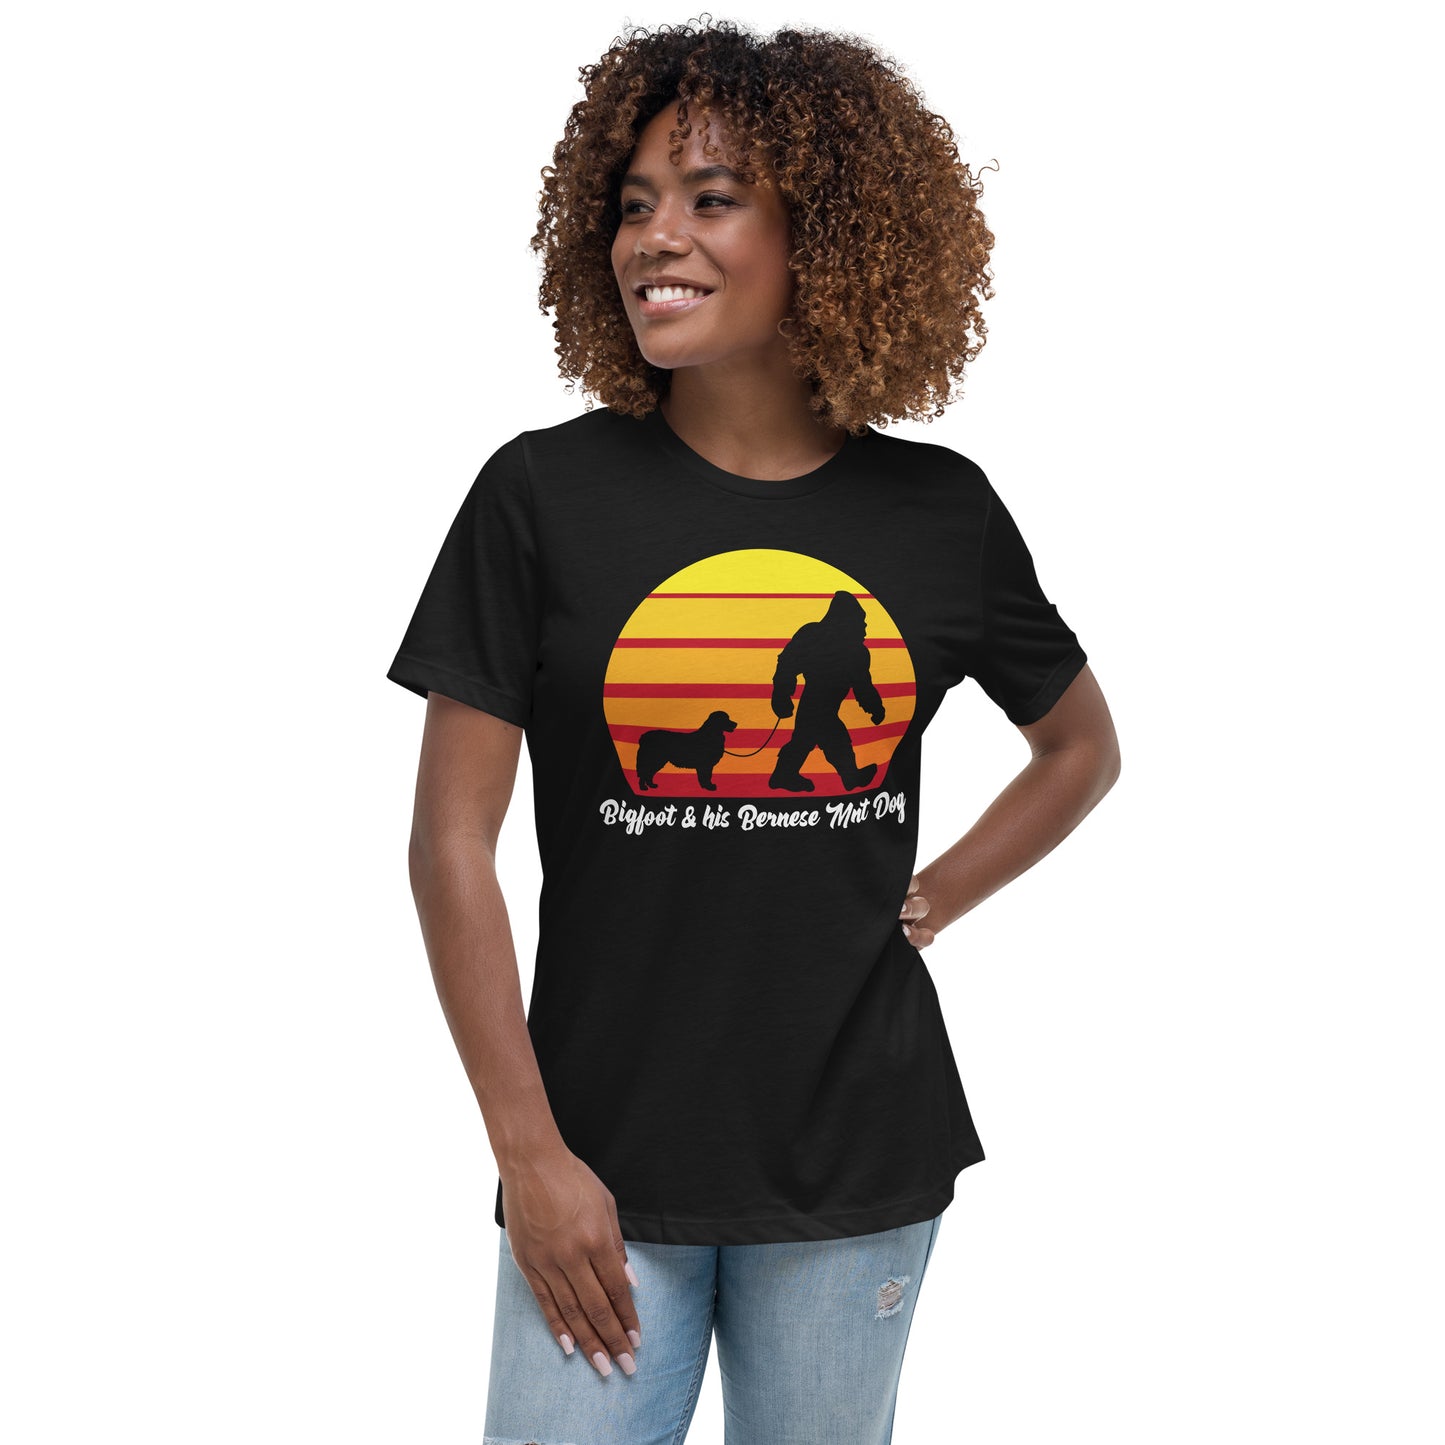 Big foot and his Bernese Mountain Dog women’s black t-shirt by Dog Artistry.